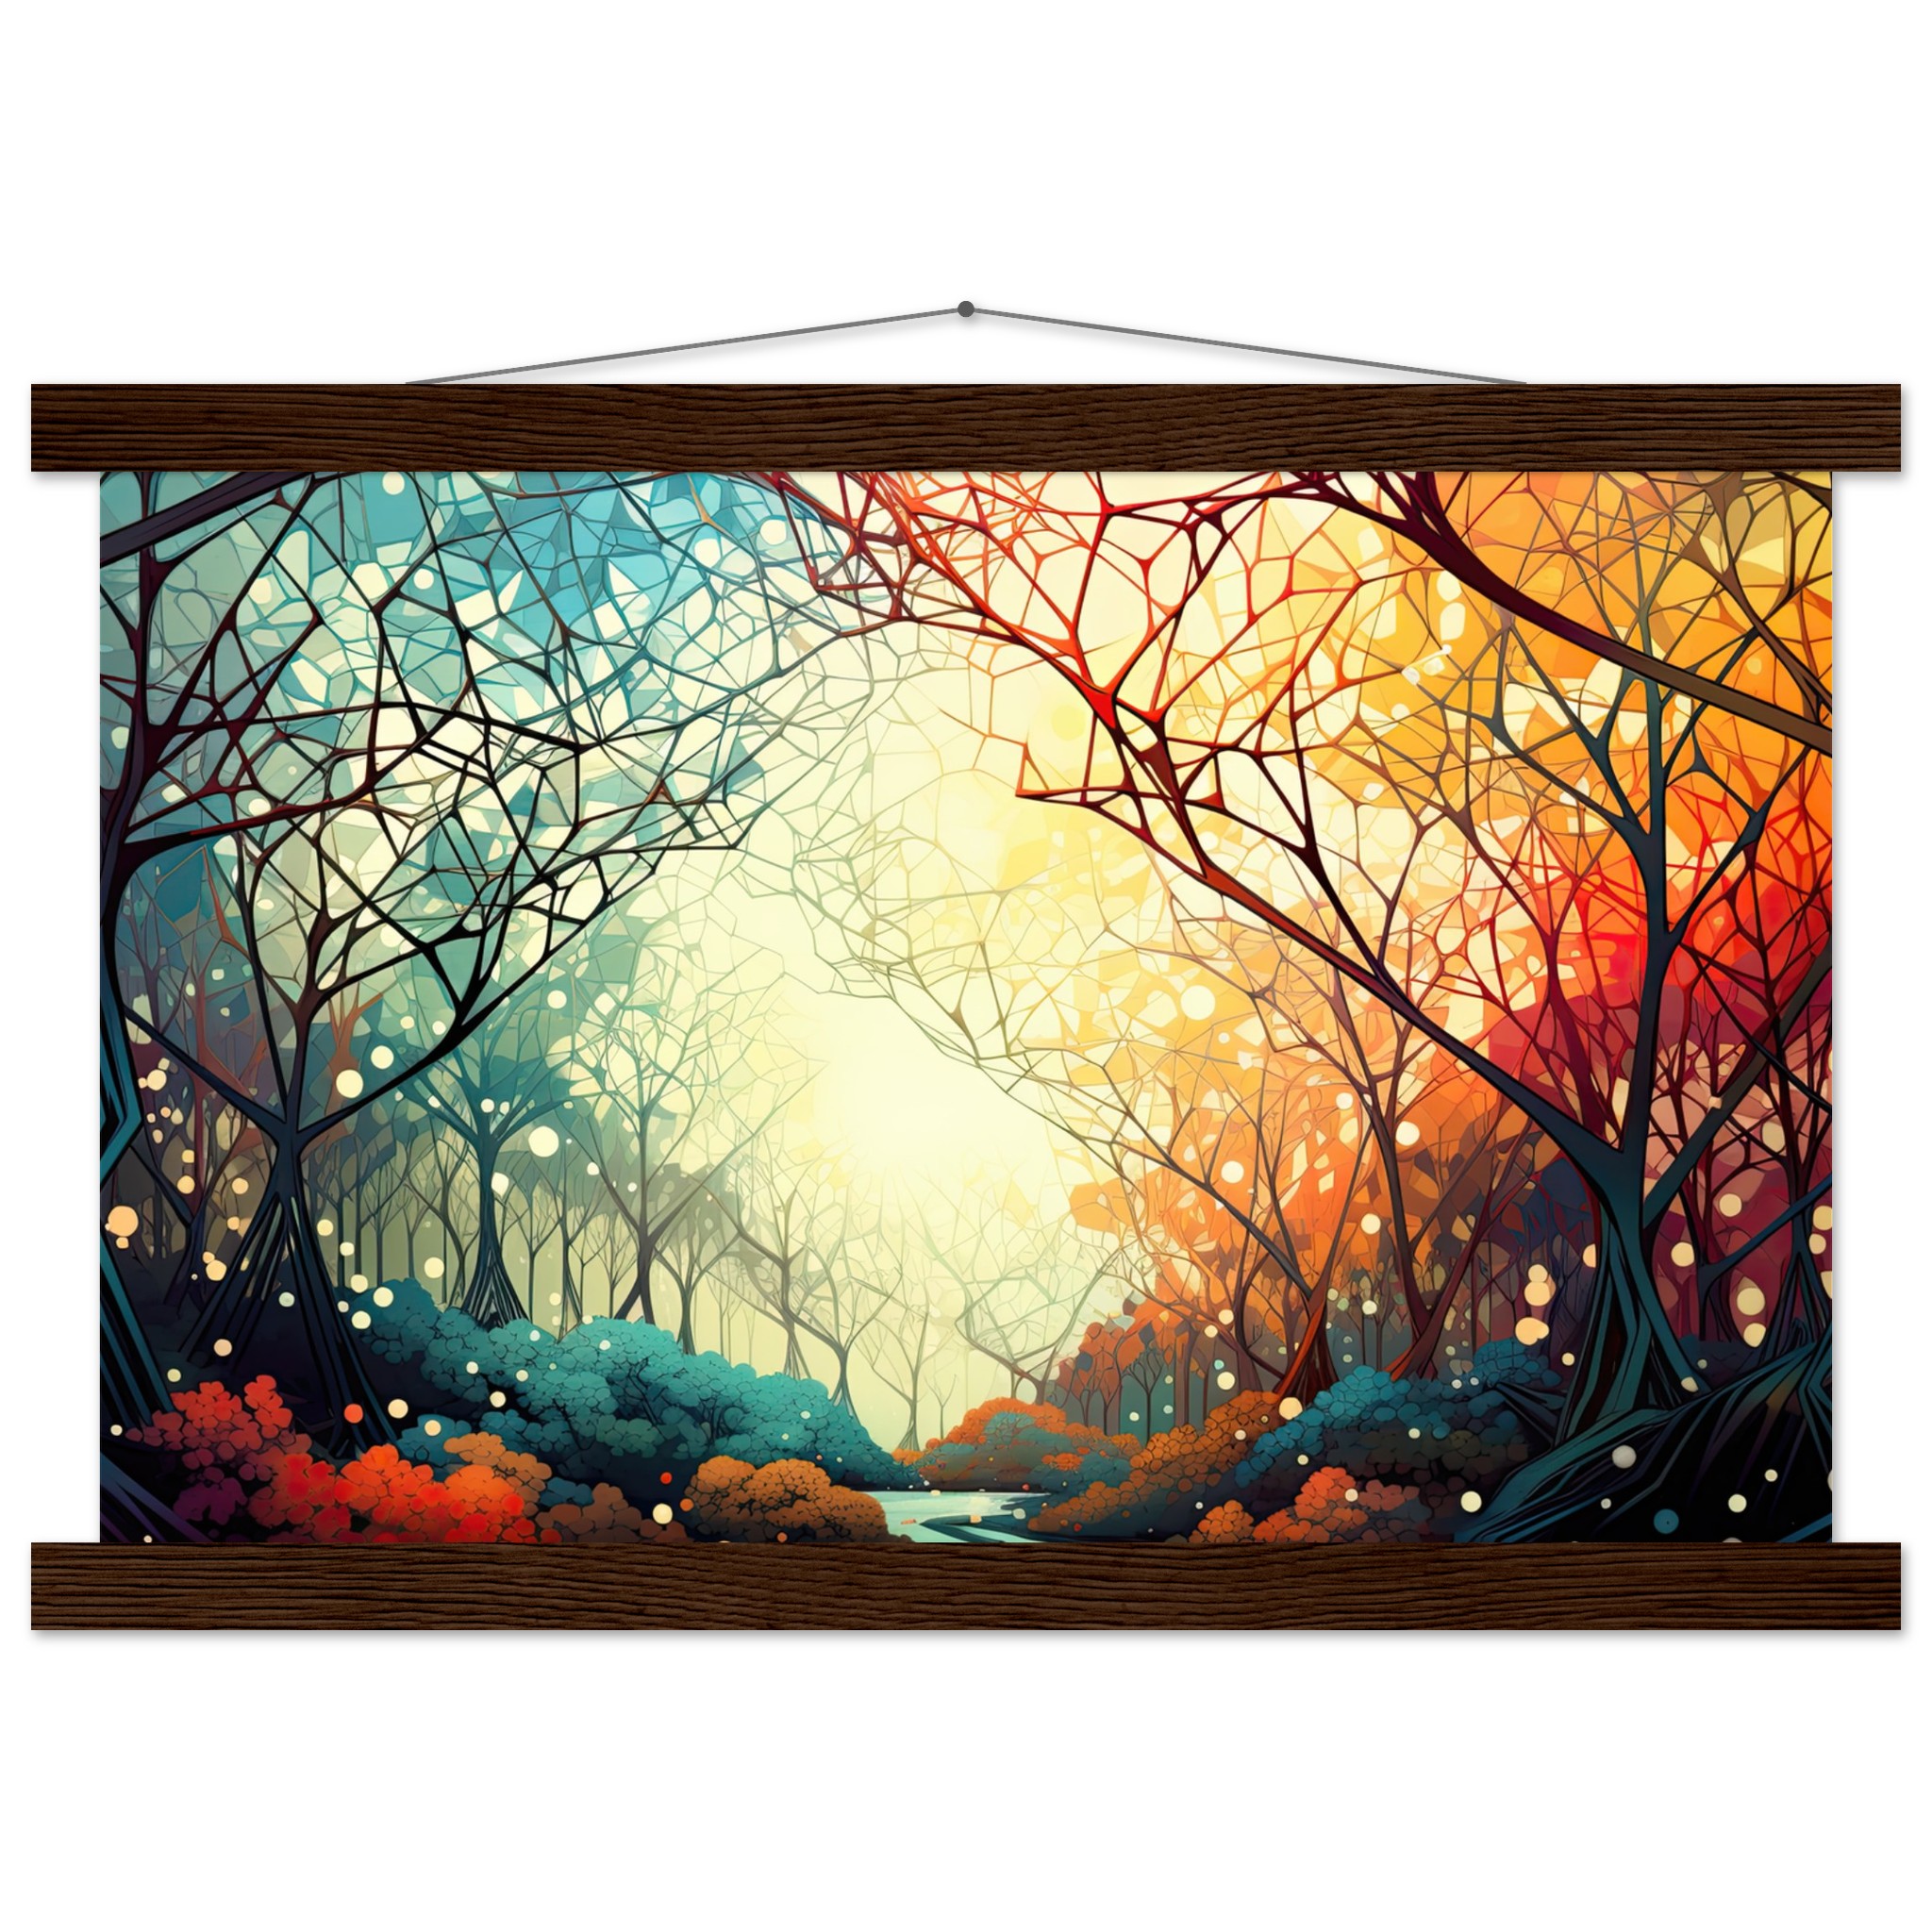 Forest Colorful Abstract Landscape Hanging Print – 30×45 cm / 12×18″, Dark wood wall hanger